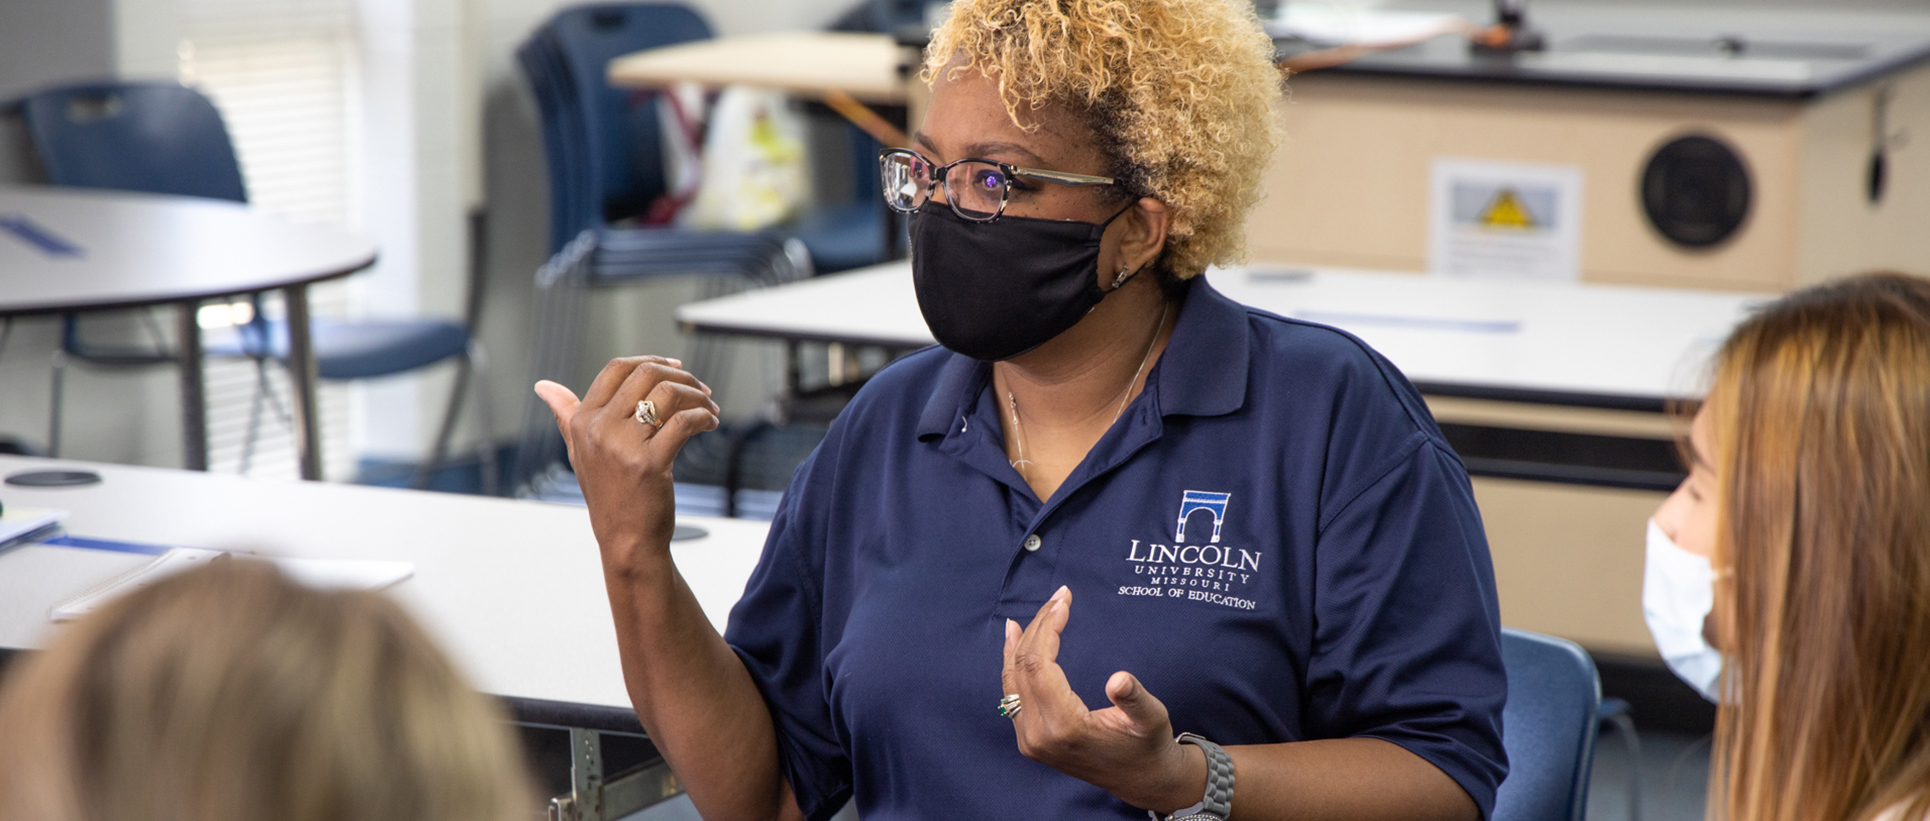  Lincoln University School of Education | Faculty and Staff 